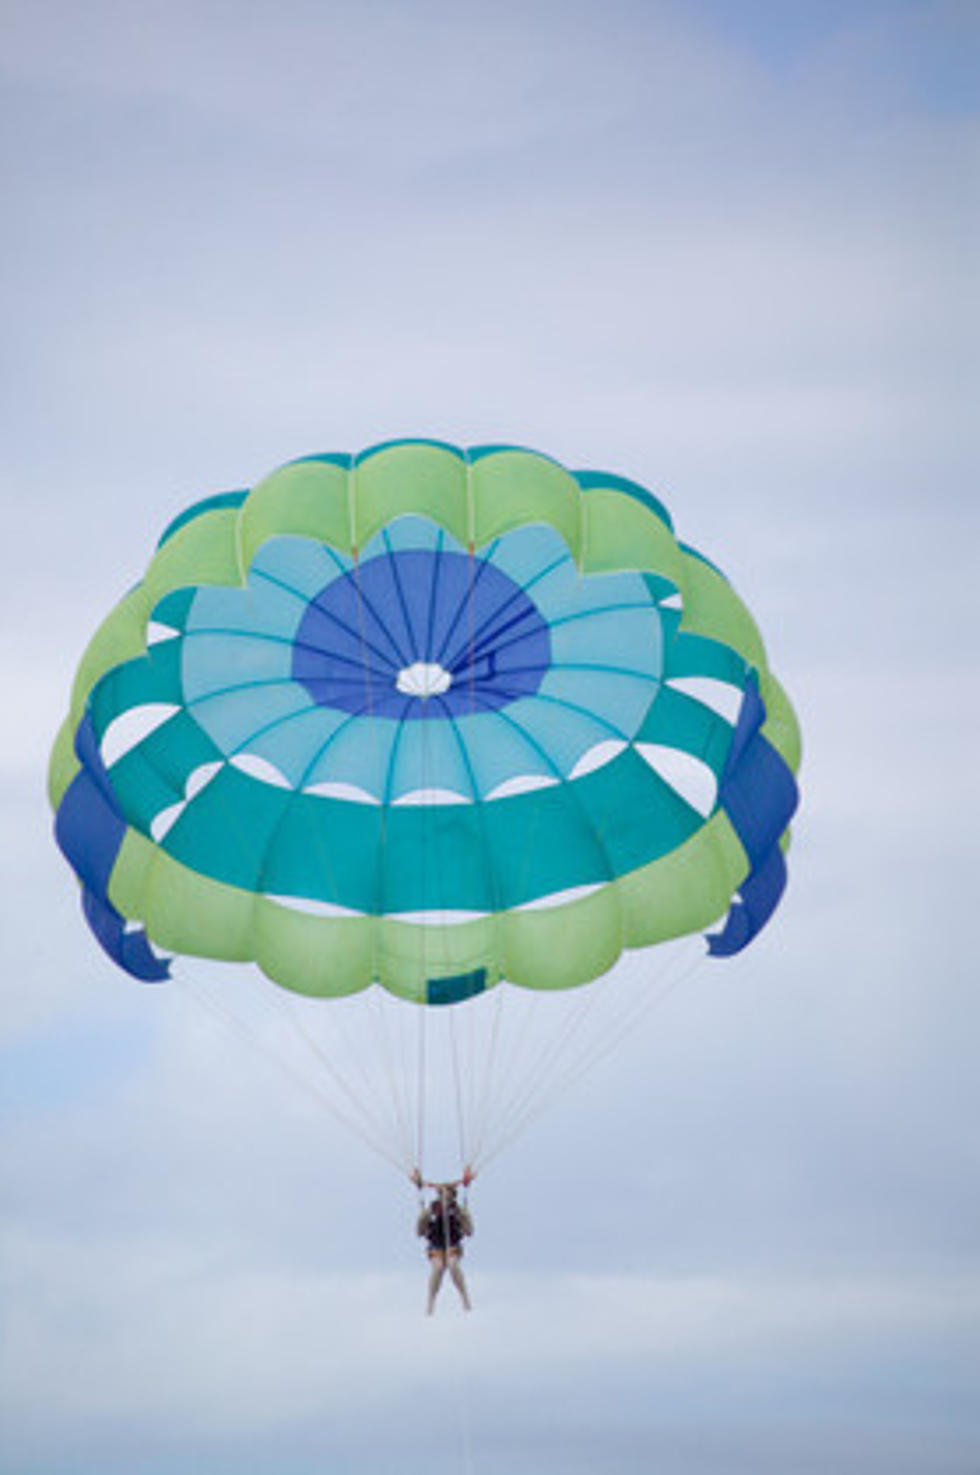 Idaho Men Banned from Hunting After Using Powered Parachute